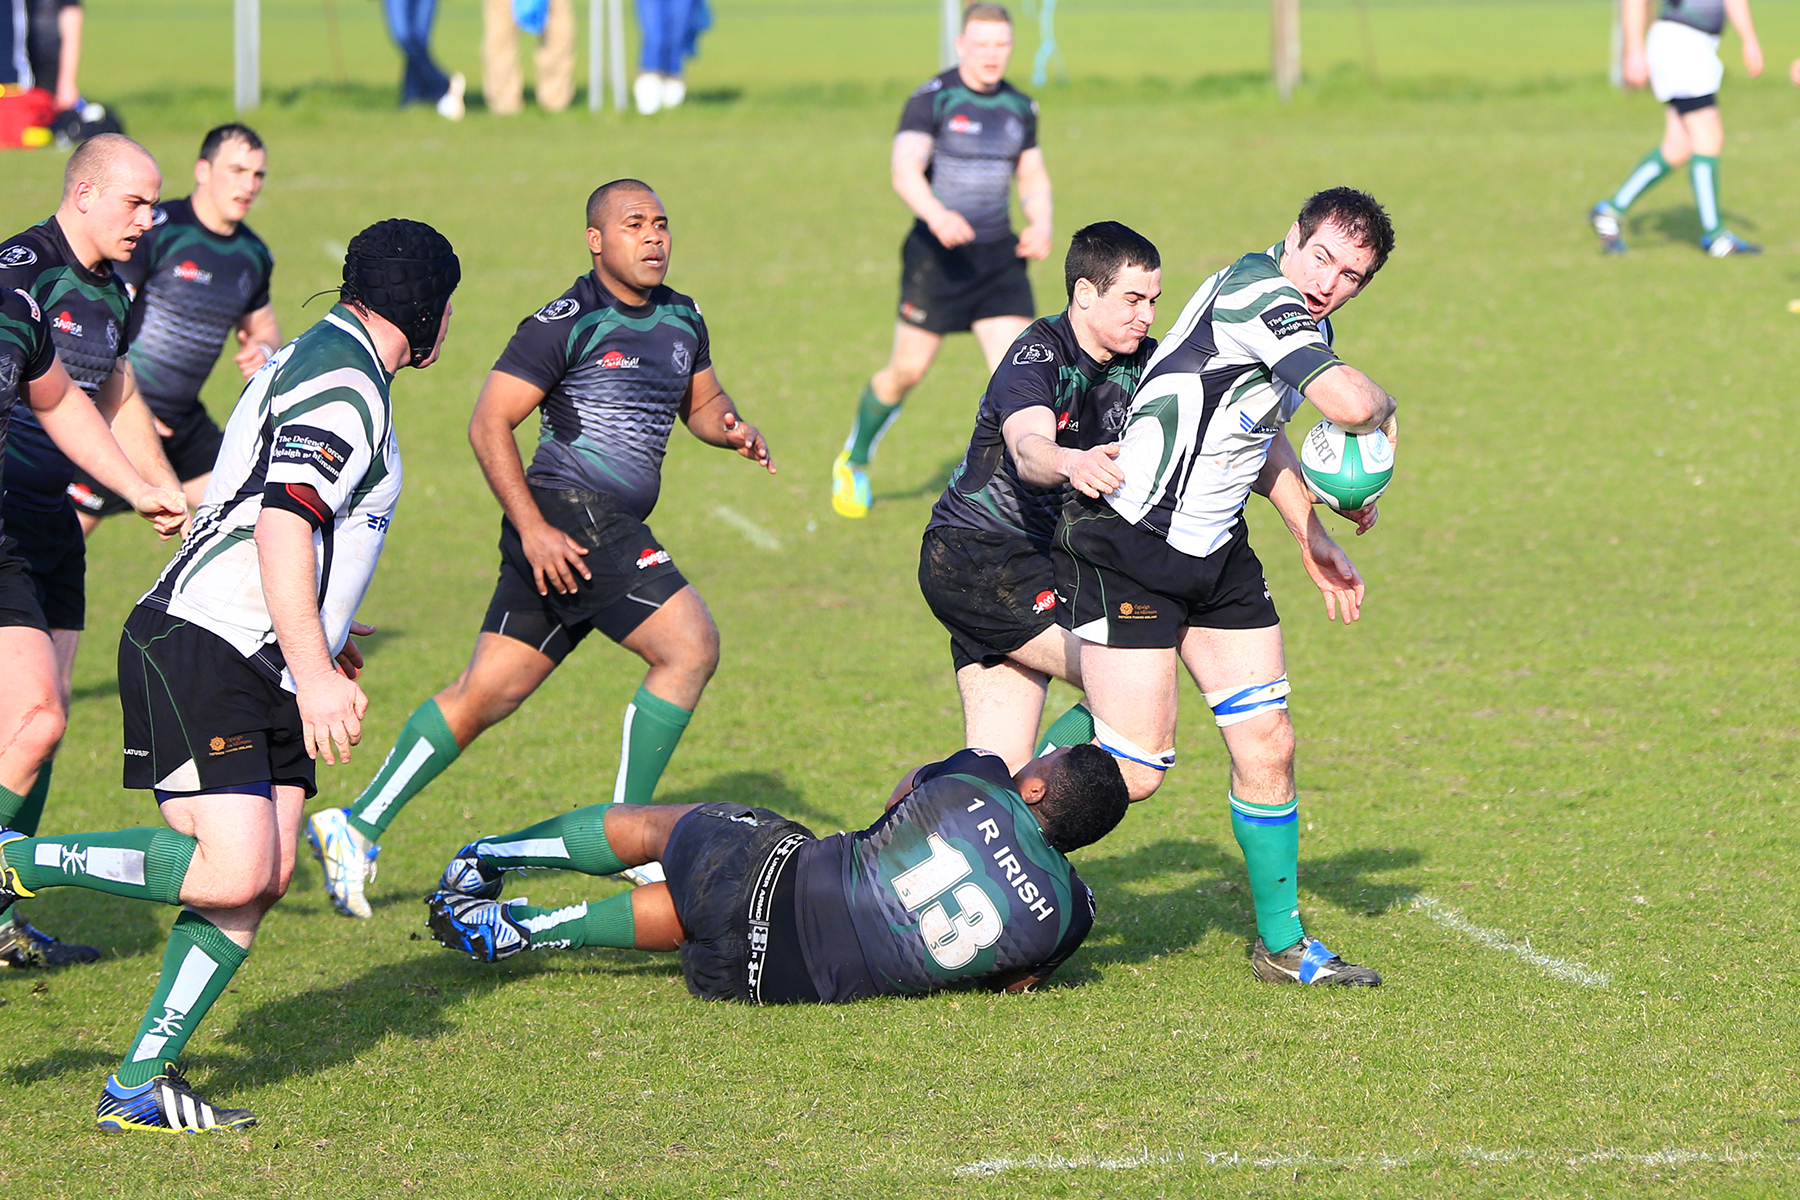 a rugby team running after a ball on the field